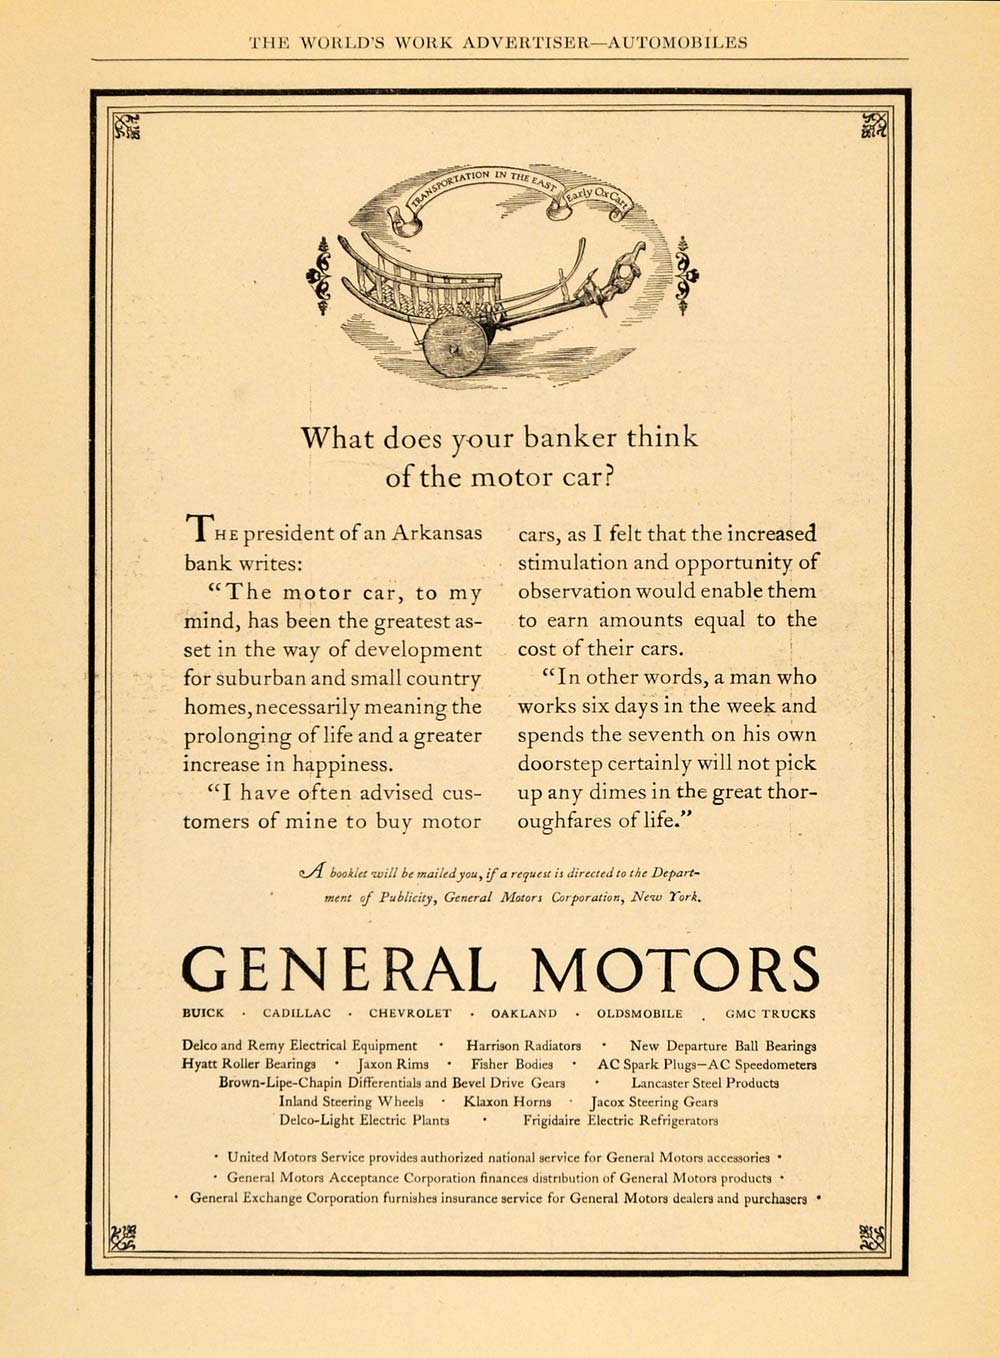 1924 Ad General Motor Cars Prolong Life and Happiness - ORIGINAL ADVERTISING WW3